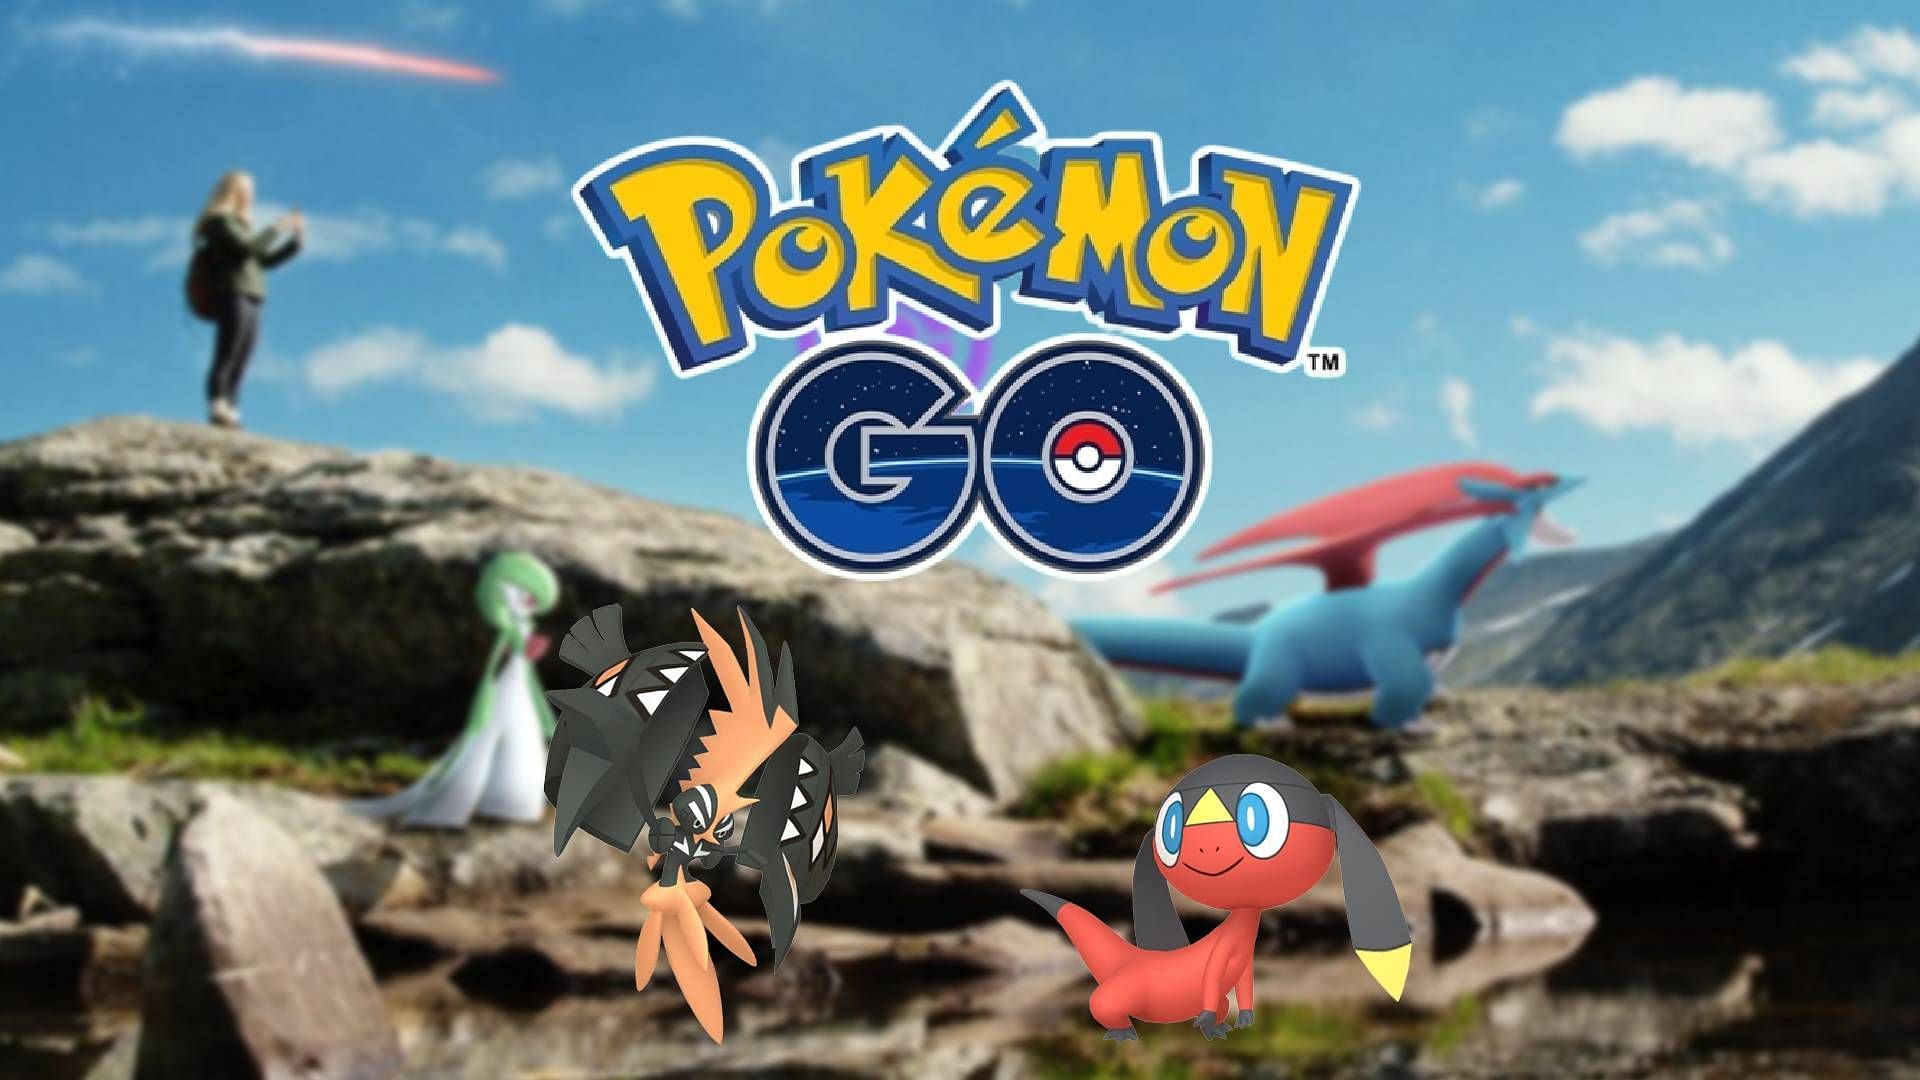 Pokémon Go's Crackling Voltage event details and two new shinies